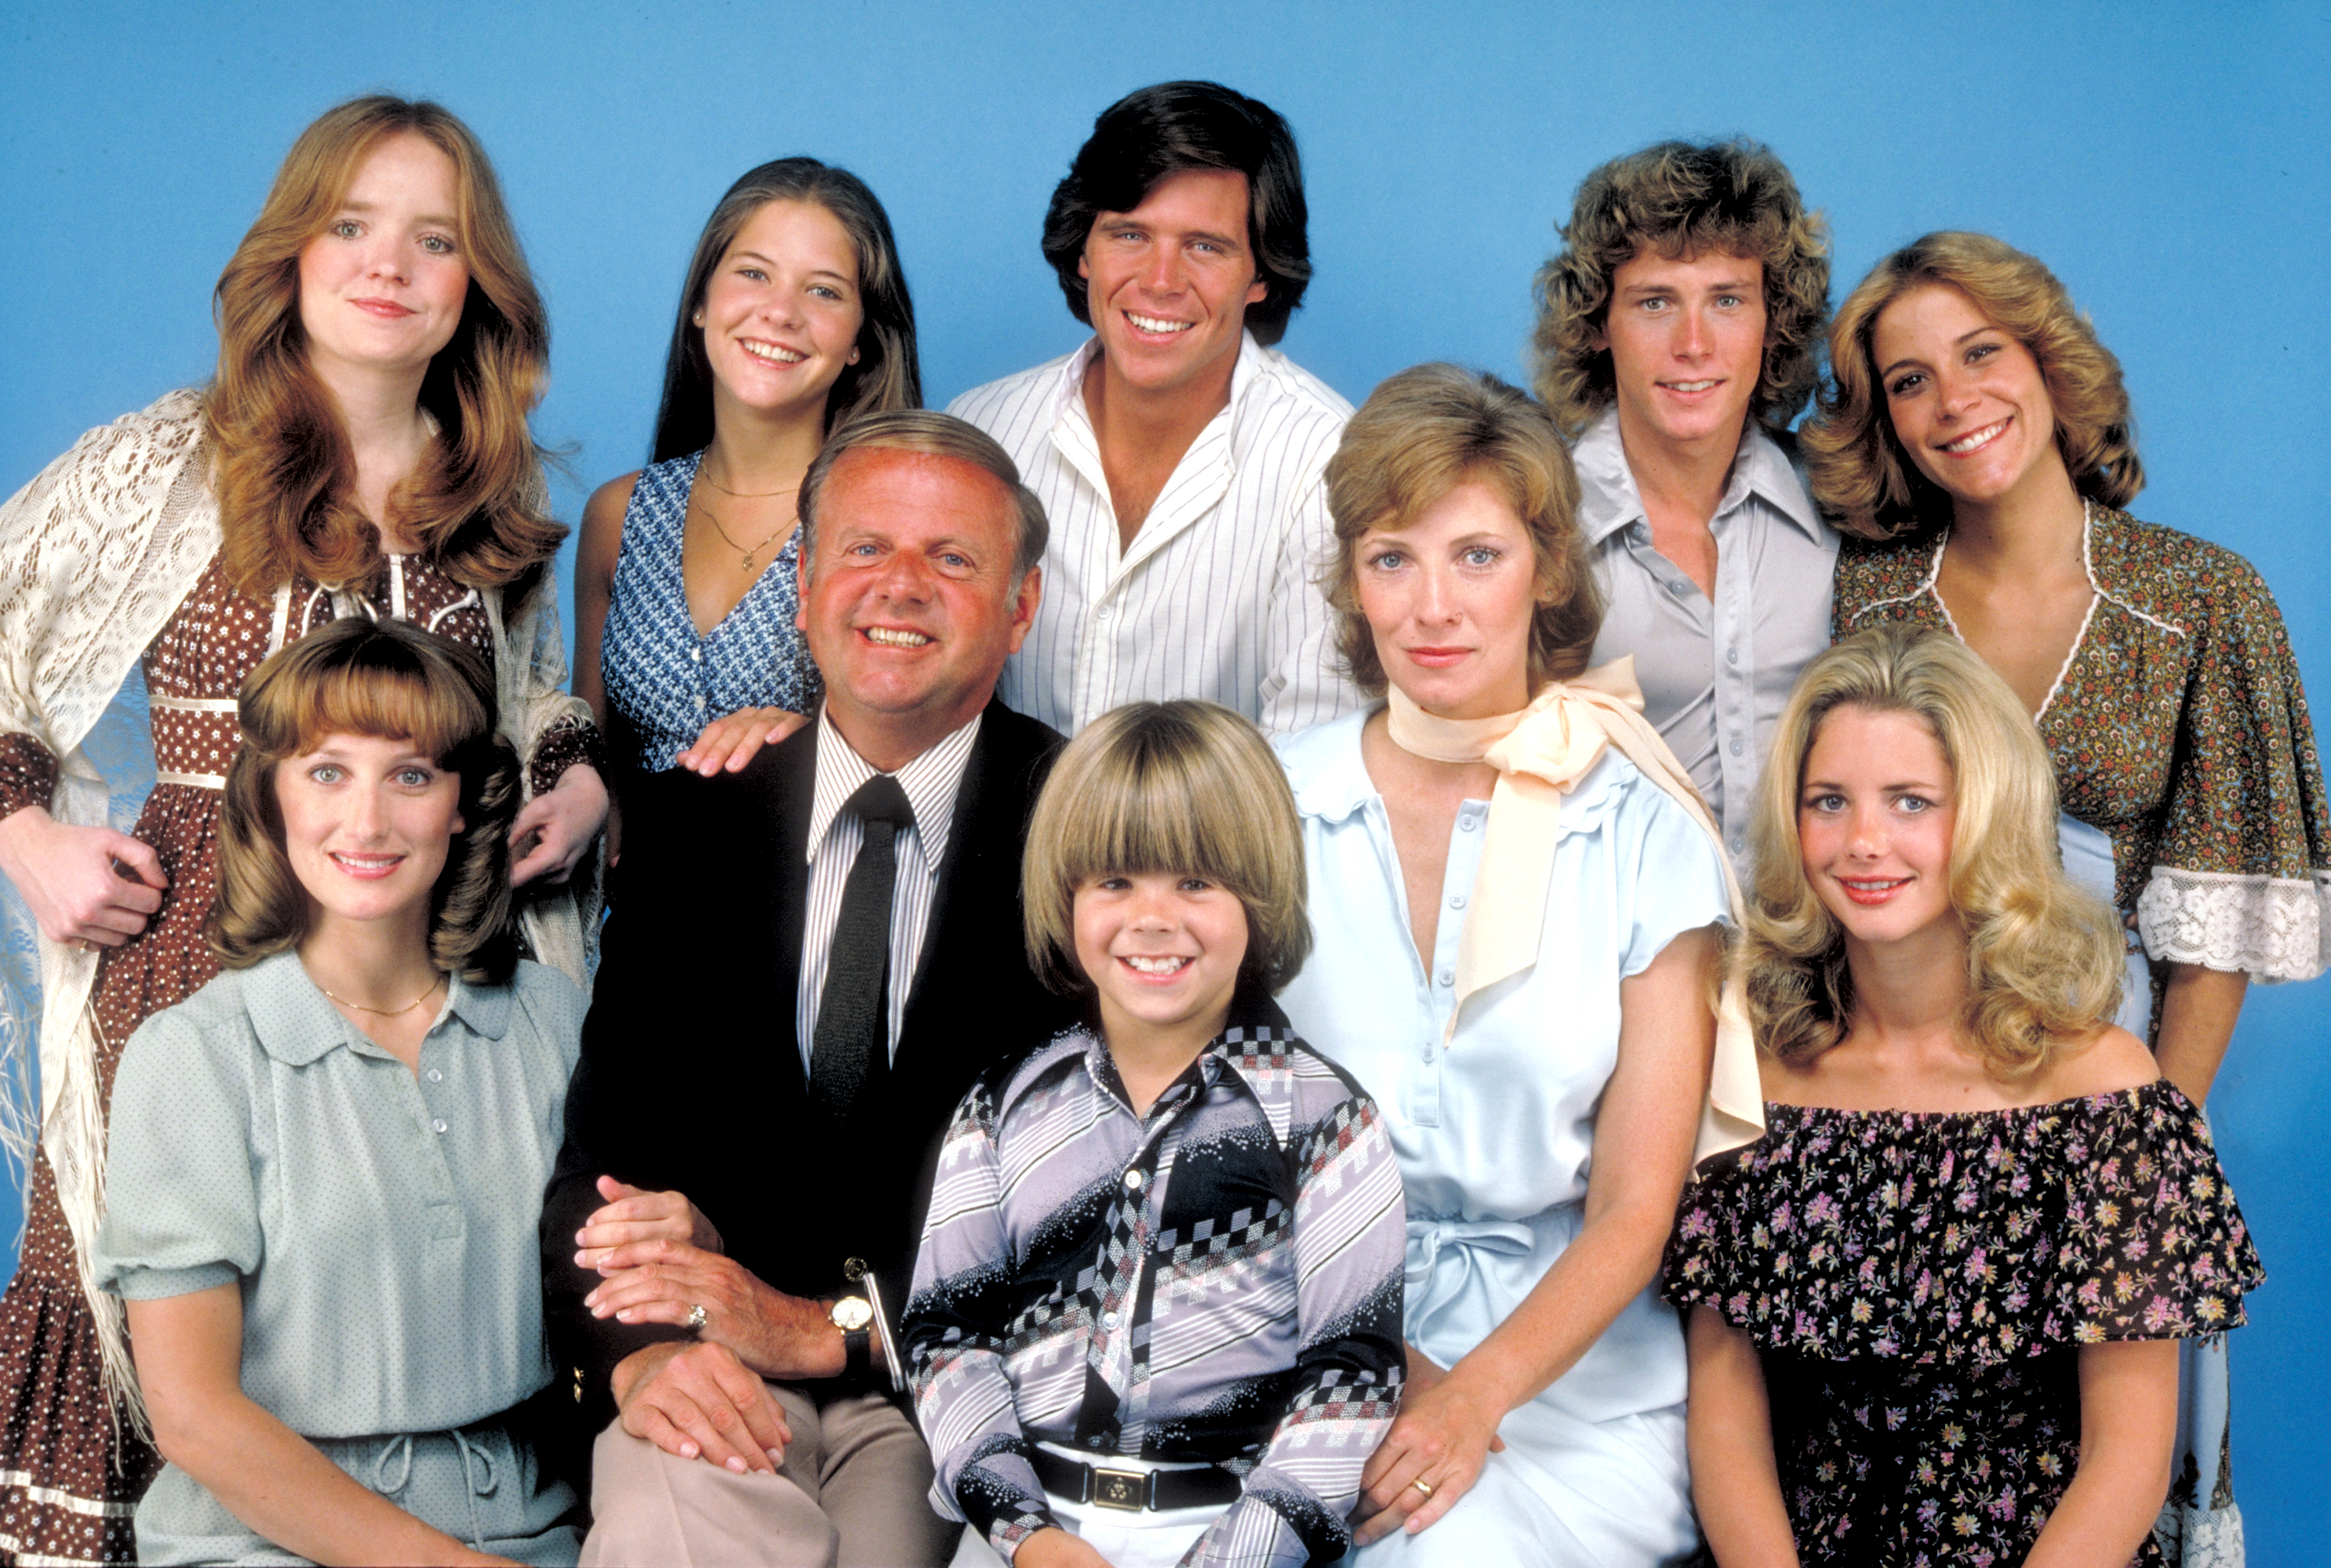 (Back row, left) back row, left: Susan Richardson, Connie Needham, Grant Goodeve, Willie Aames, Lani O'Grady; Bottom row: Laurie Walters, Dick Van Patten, Adam Rich, Betty Buckley, Dianne Kay photographed during Season 3 of "Eight Is Enough" on September 1, 1978 | Source: Getty Images